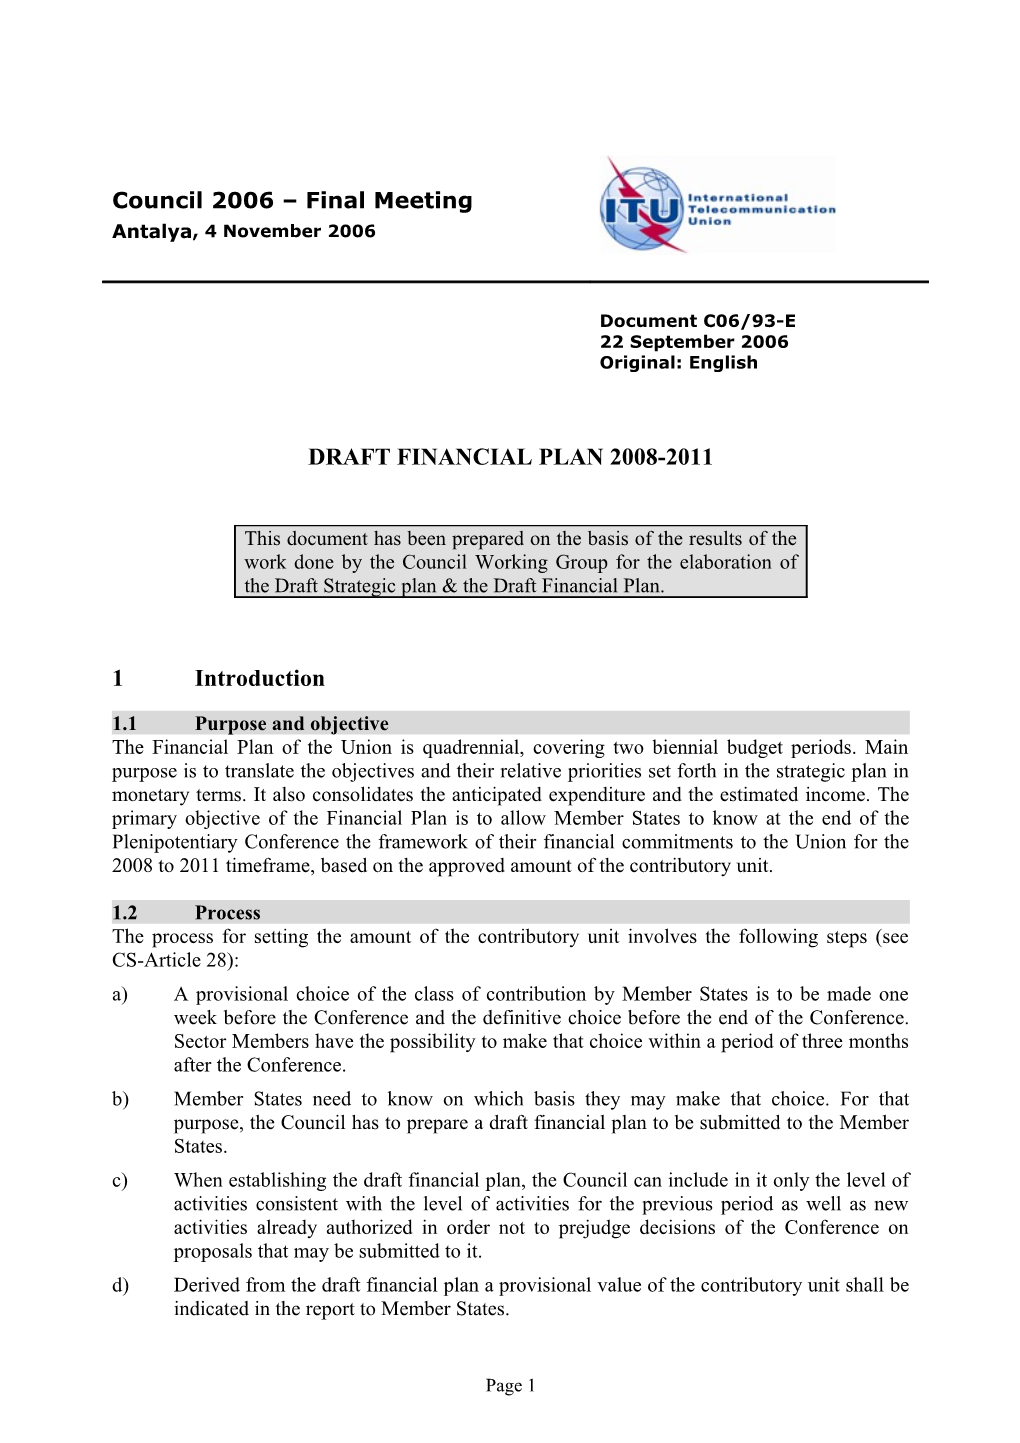 Draft Financial Plan for the Period 2008-2011